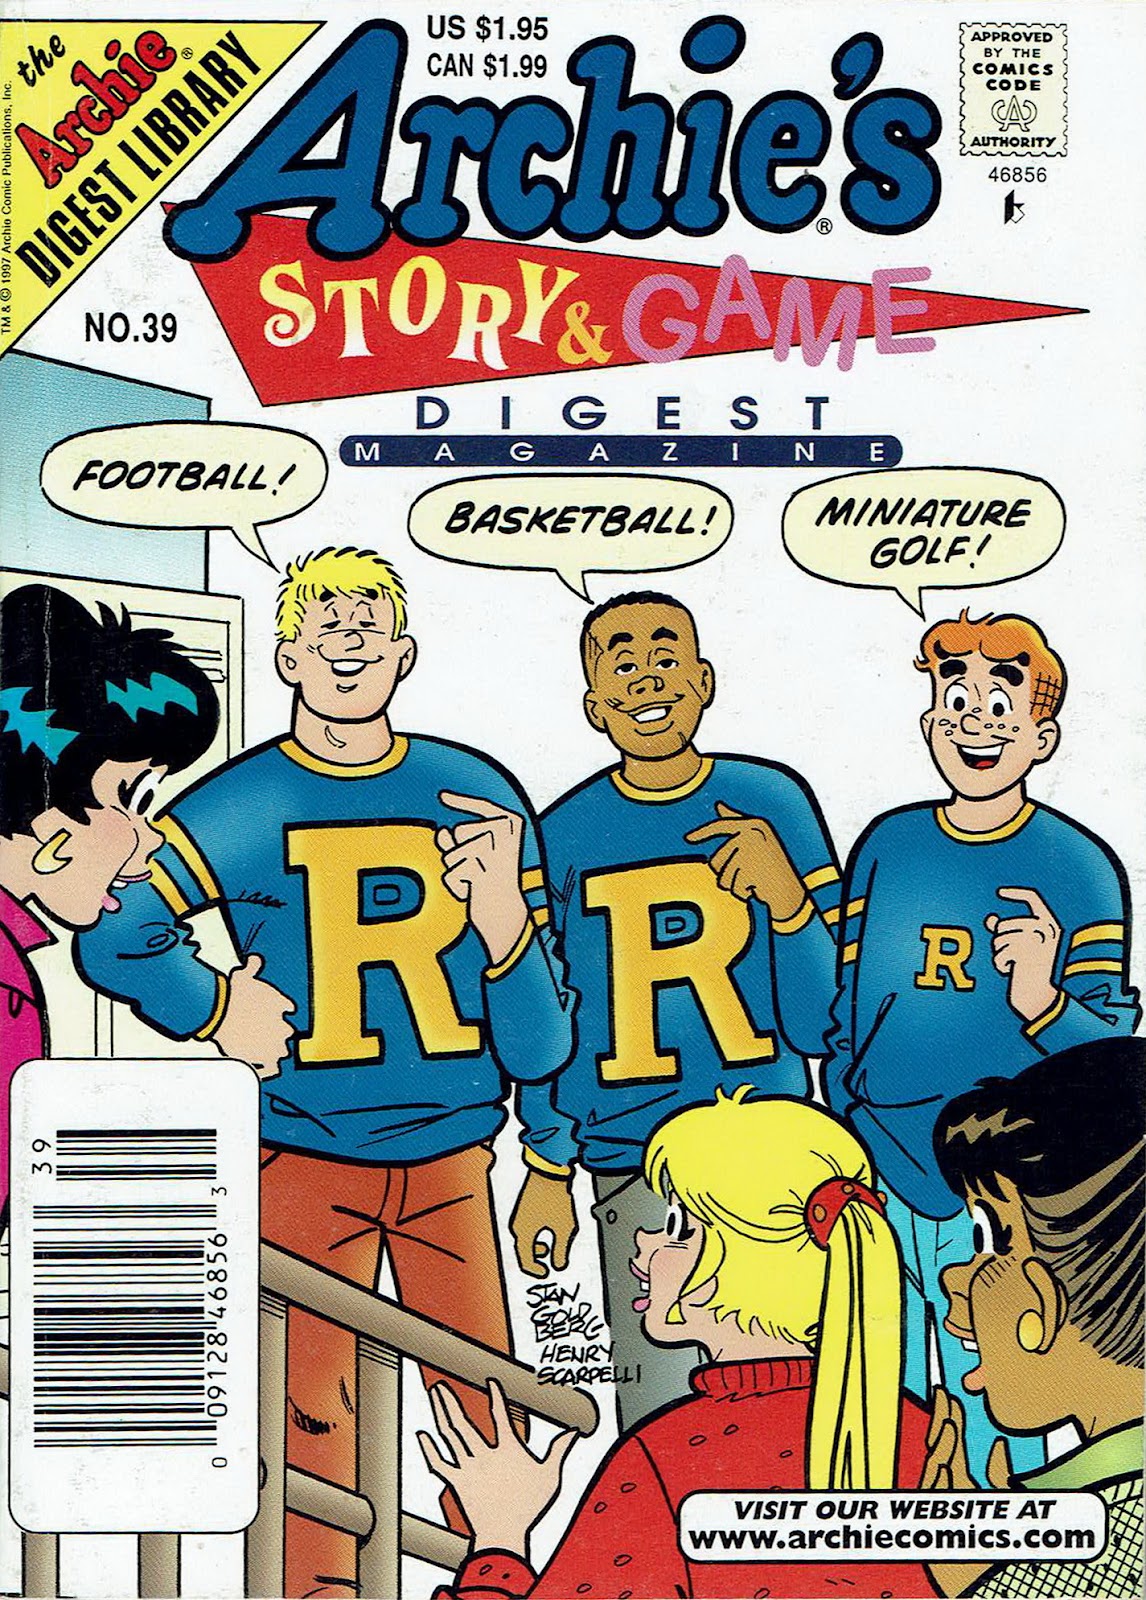 Archie's Story & Game Digest Magazine issue 39 - Page 1